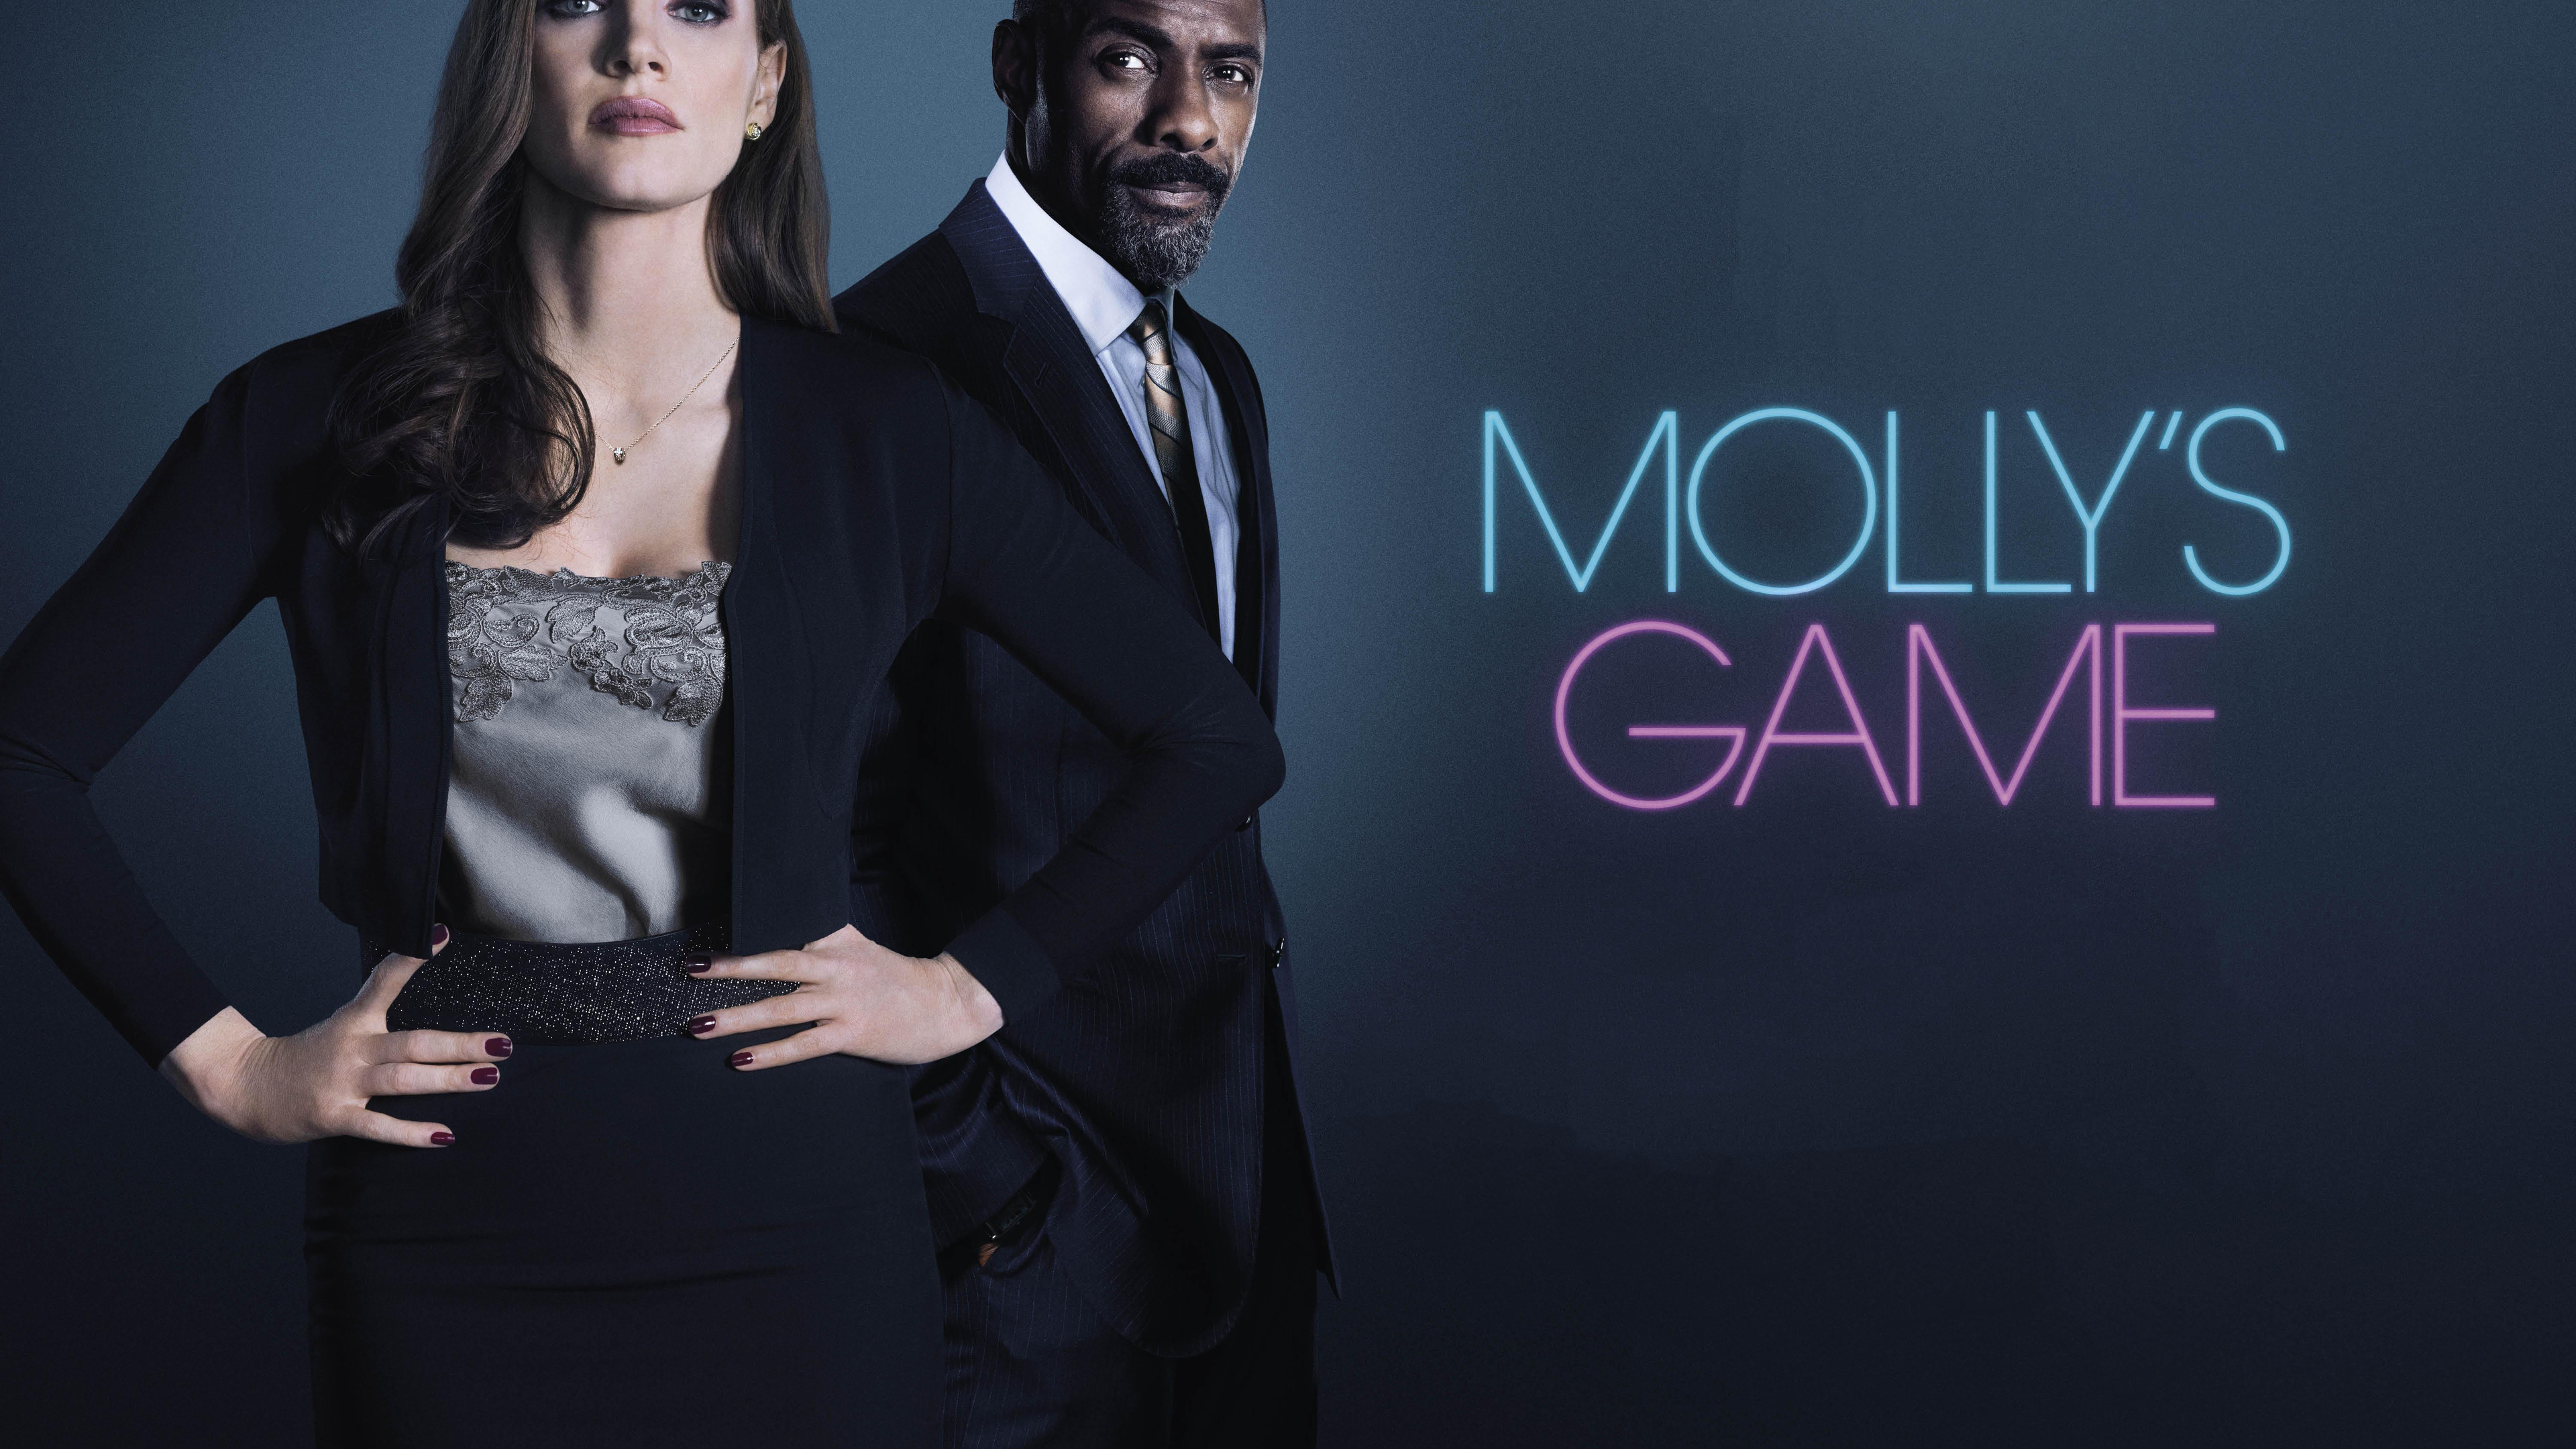 mollys game 2018 jessica chastain idris elba poster 1536862094 - Mollys Game 2018 Jessica Chastain Idris Elba Poster - movies wallpapers, mollys game wallpapers, jessica chastain wallpapers, hd-wallpapers, 4k-wallpapers, 2018-movies-wallpapers